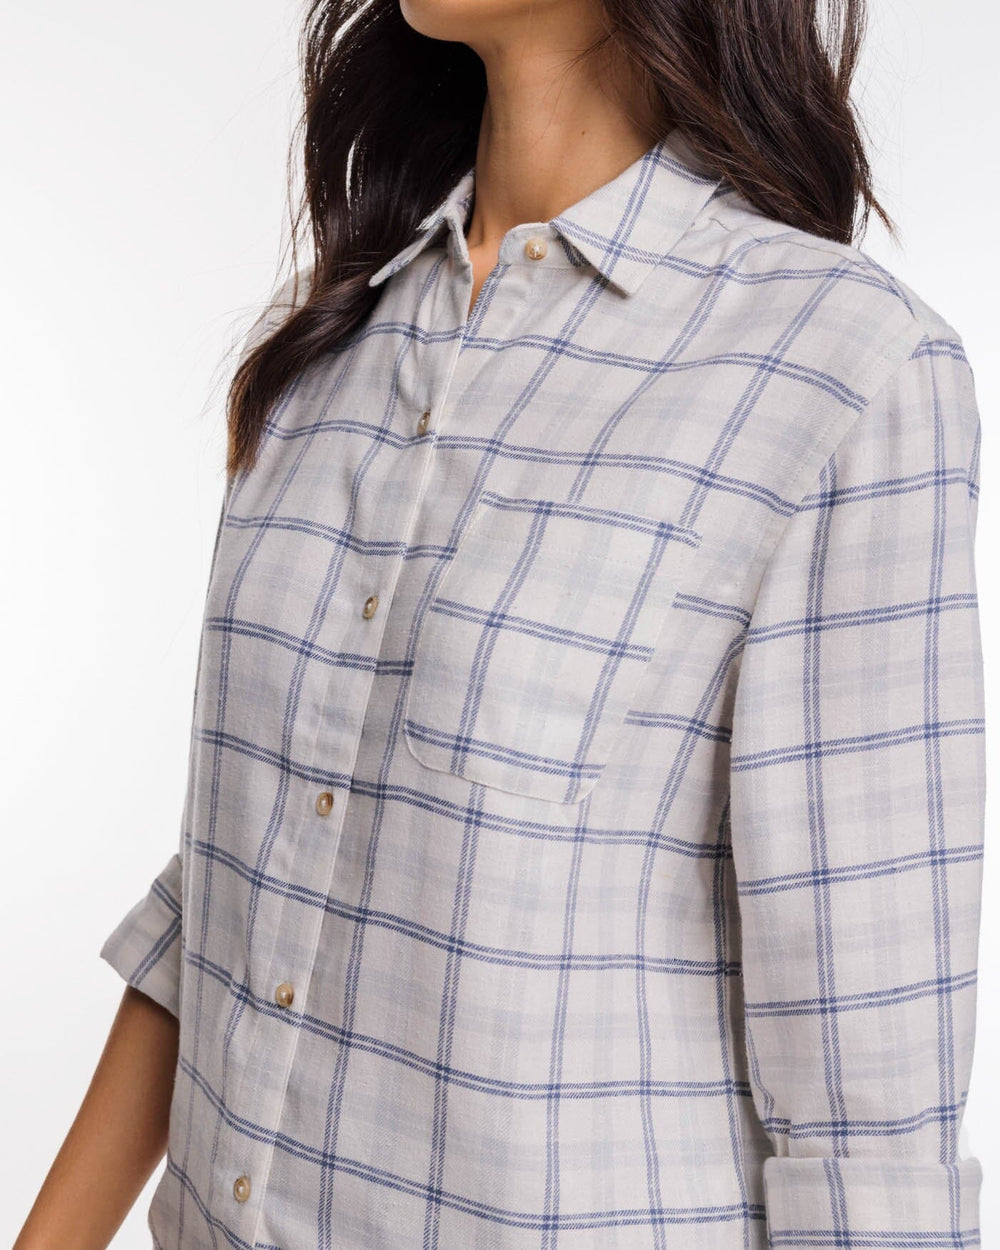 The detail view of the Southern Tide Niki Chilly Morning Plaid Shirt by Southern Tide - Marshmallow